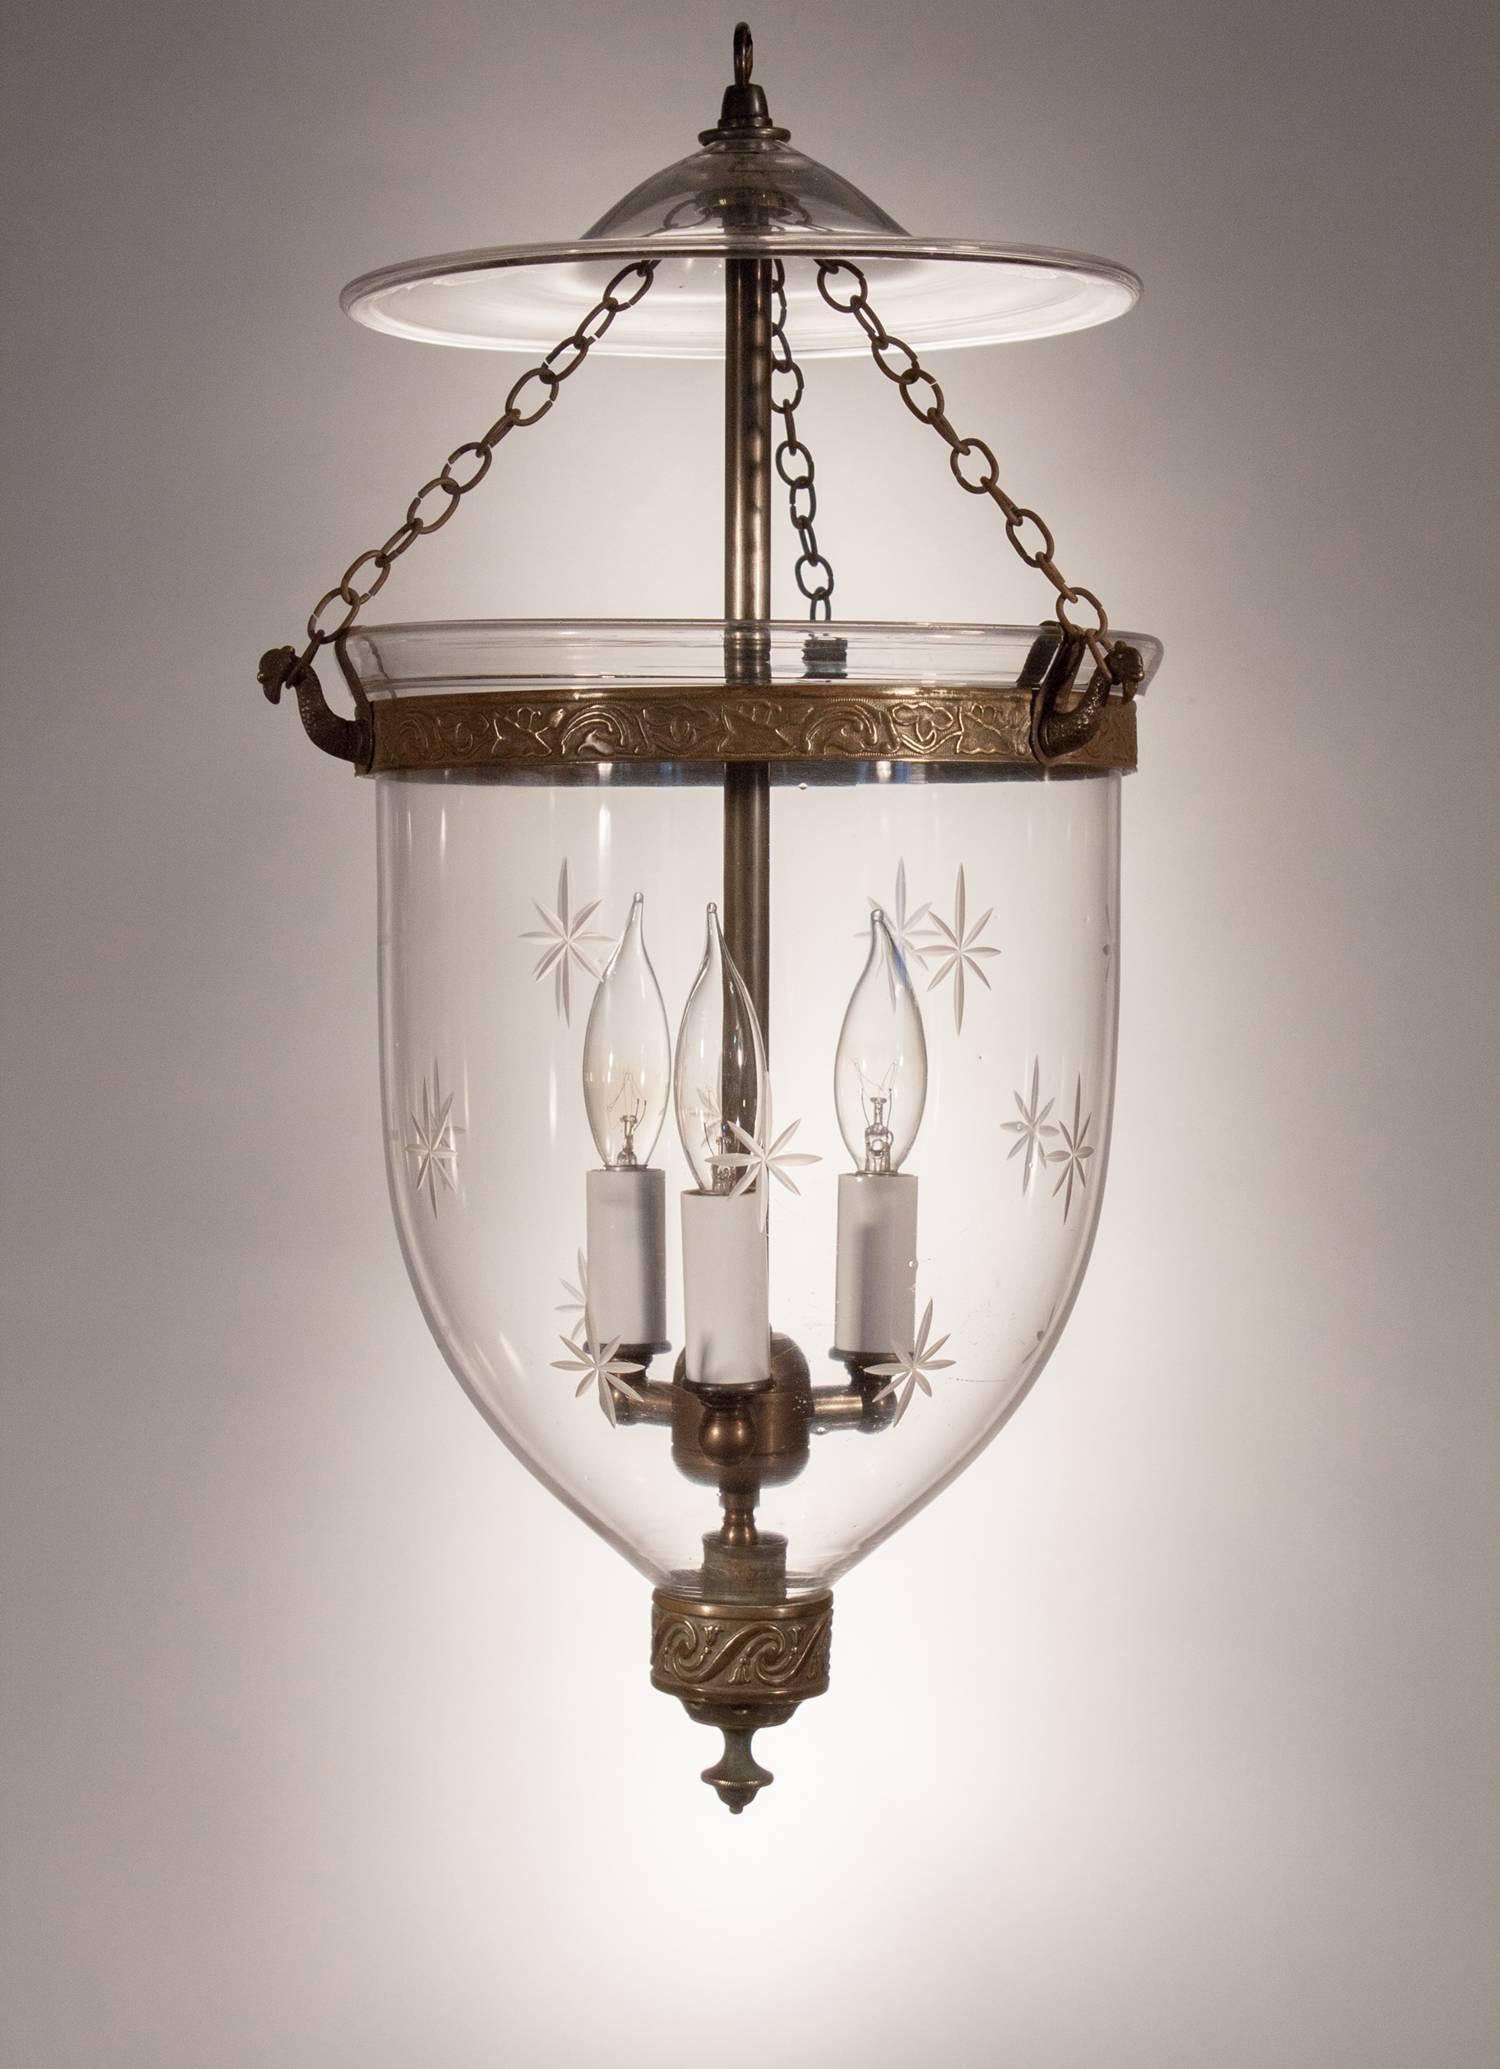 19th century handblown glass bell jar lantern from England with truly beautiful form and brass details. This smaller-sized hall lantern has its original smoke bell and candle holder finial with tassel motif in deep relief. The brass band, which has